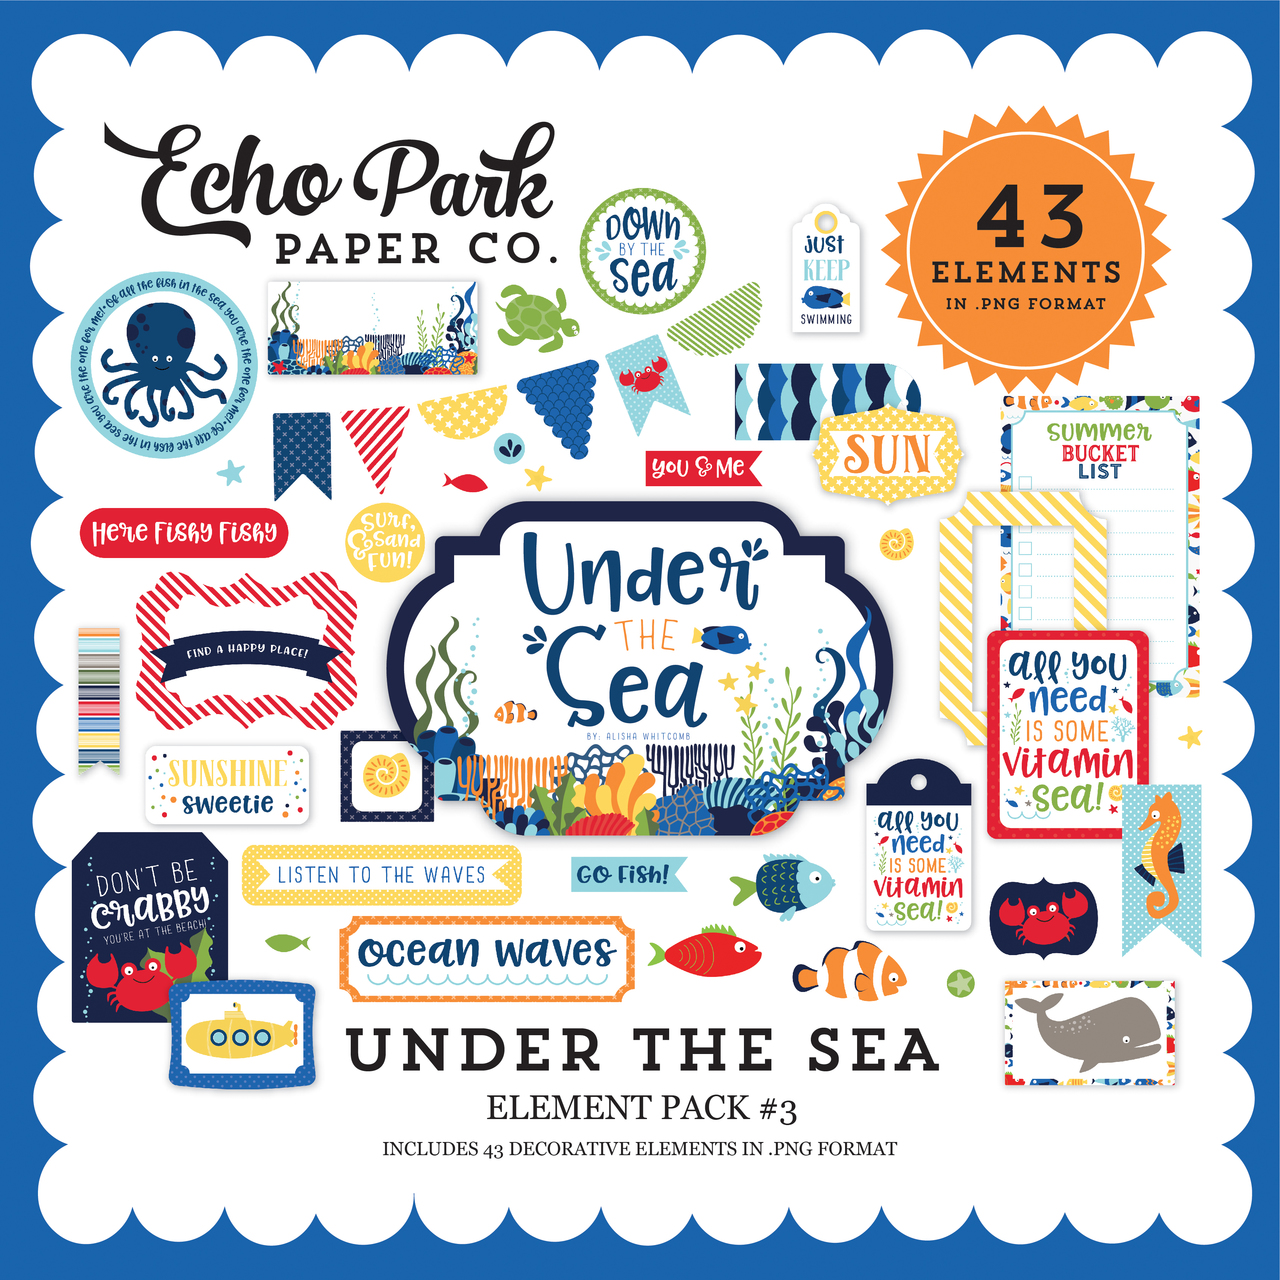 Under the Sea Element Pack #3